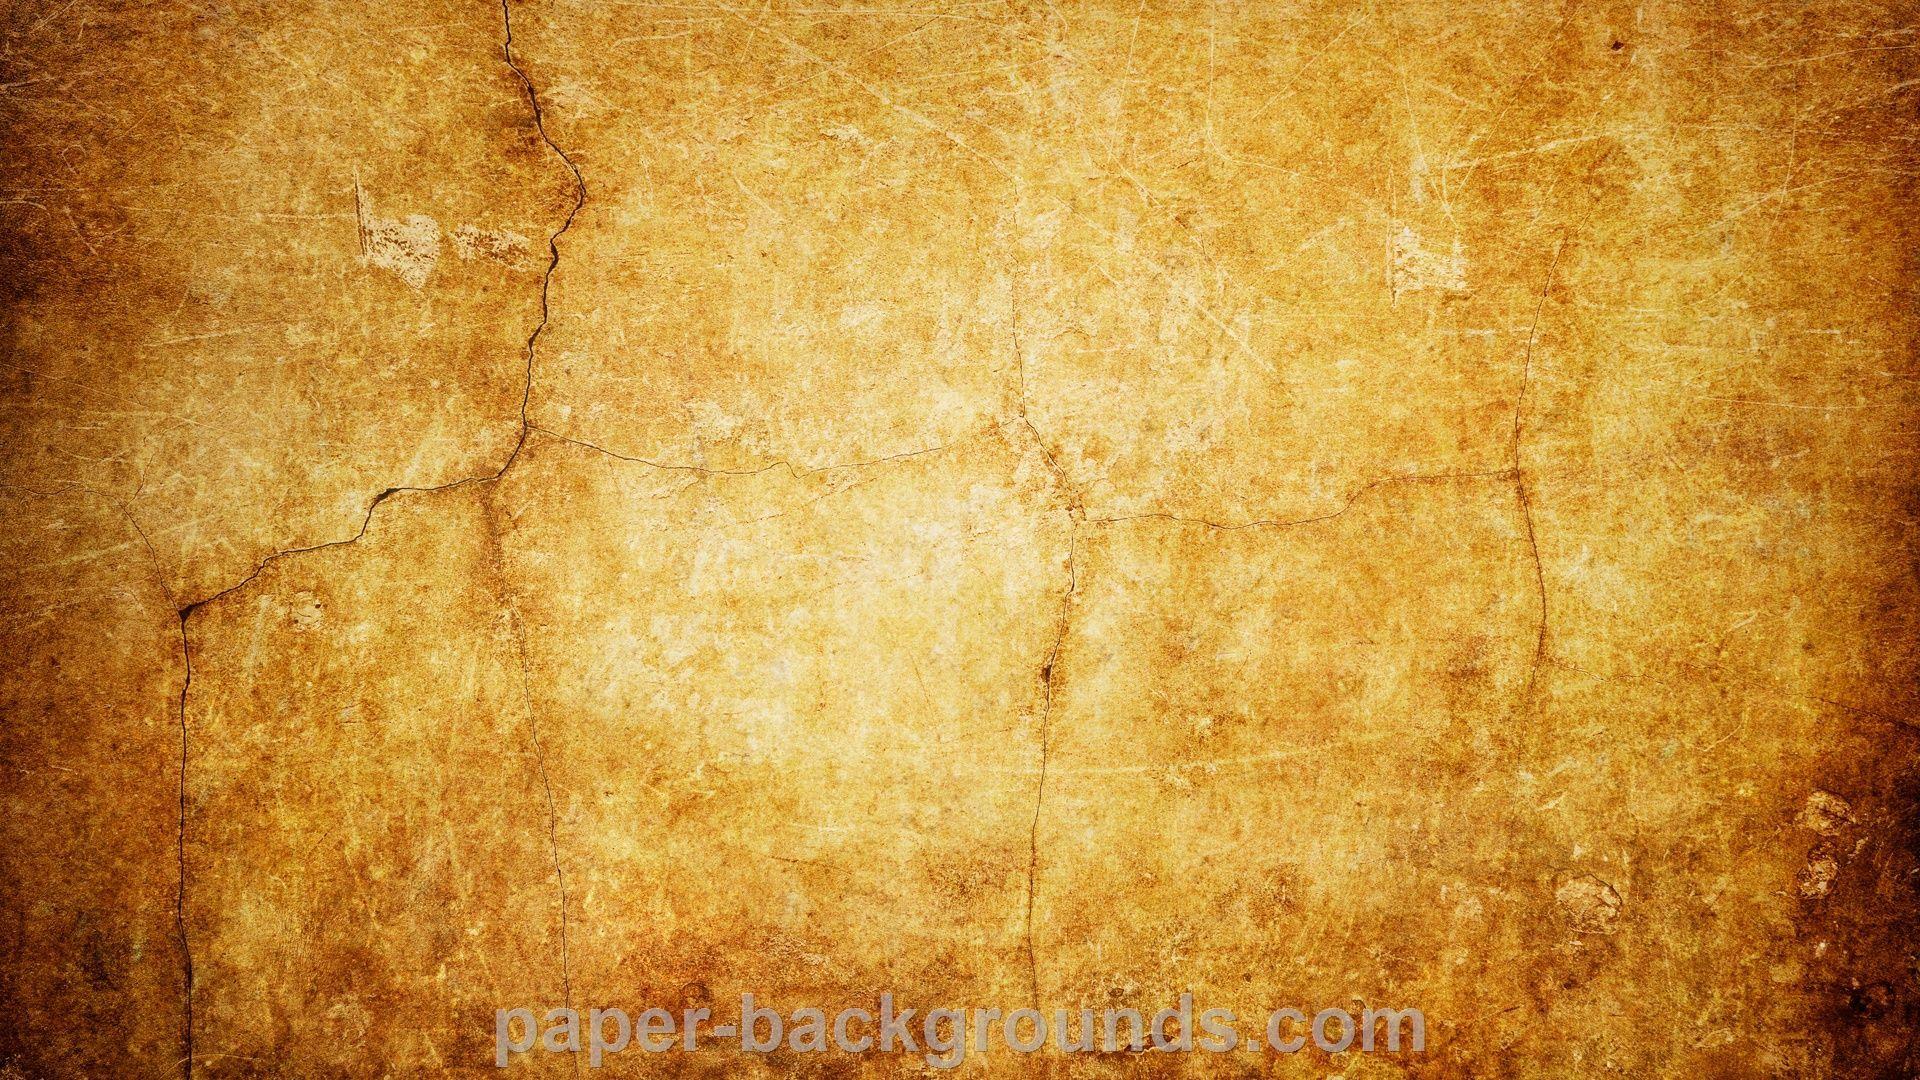 Background Wallpaper. Vintage Wall Texture Background Hd. Paper